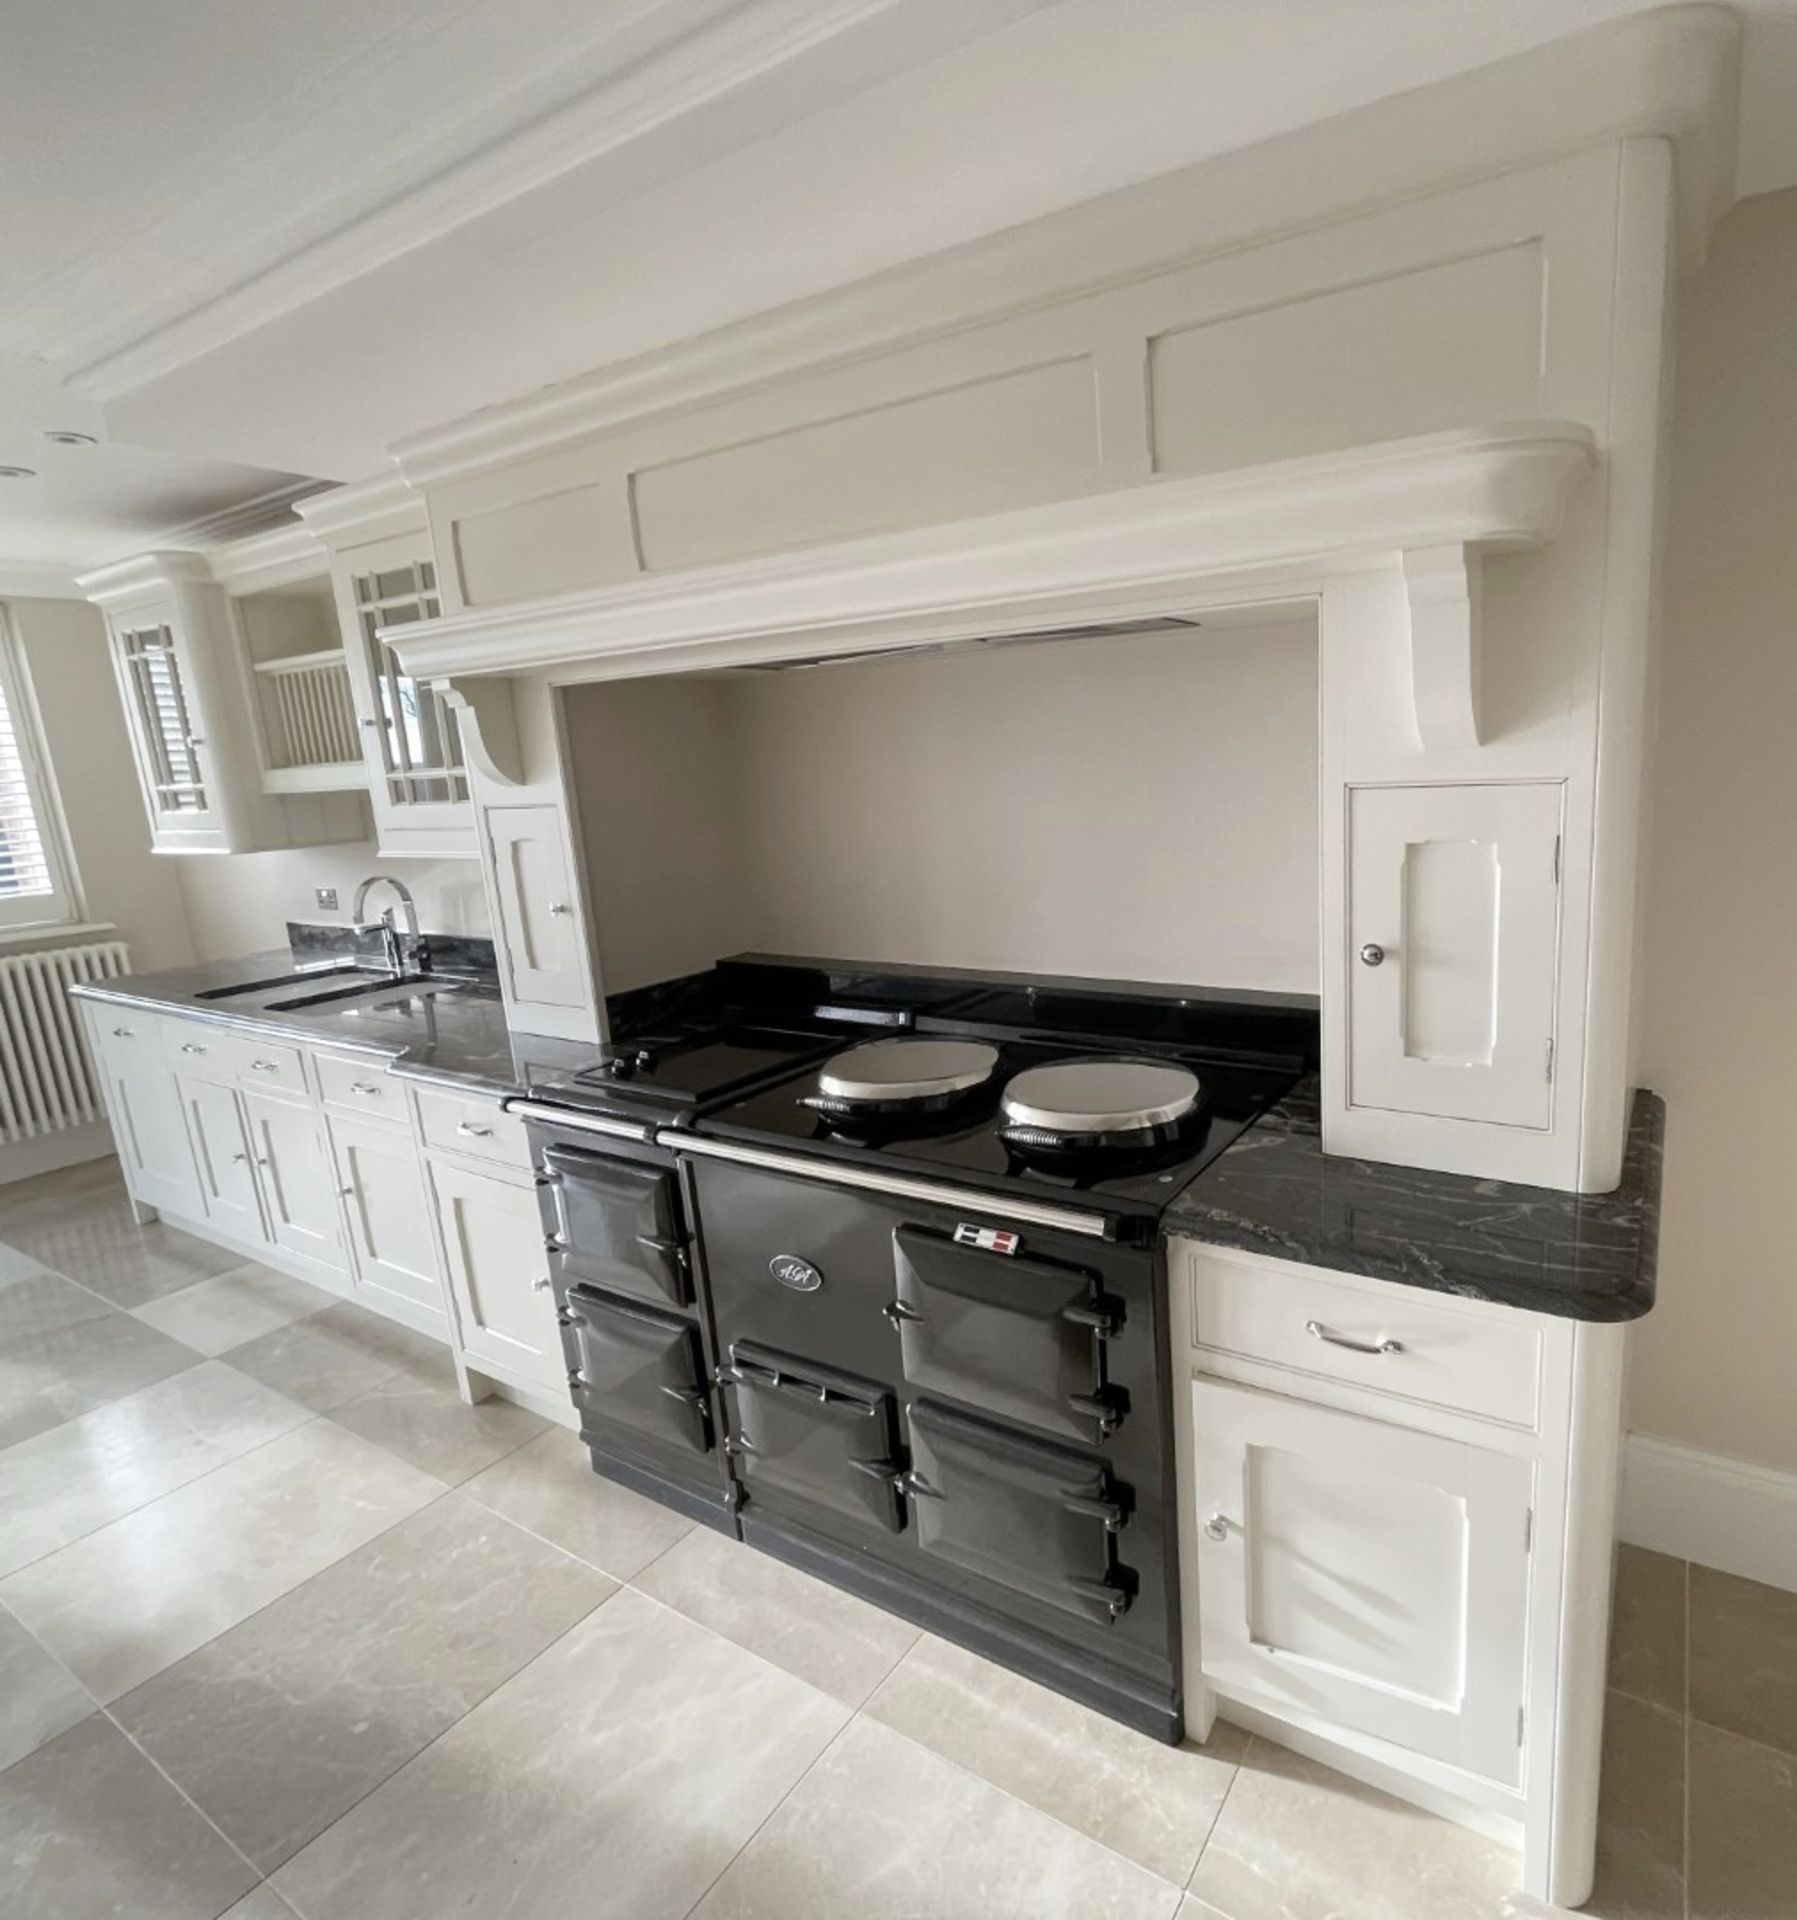 1 x Bespoke Handcrafted Shaker-style Fitted Kitchen Marble Surfaces, Island & Miele Appliances - Image 15 of 221